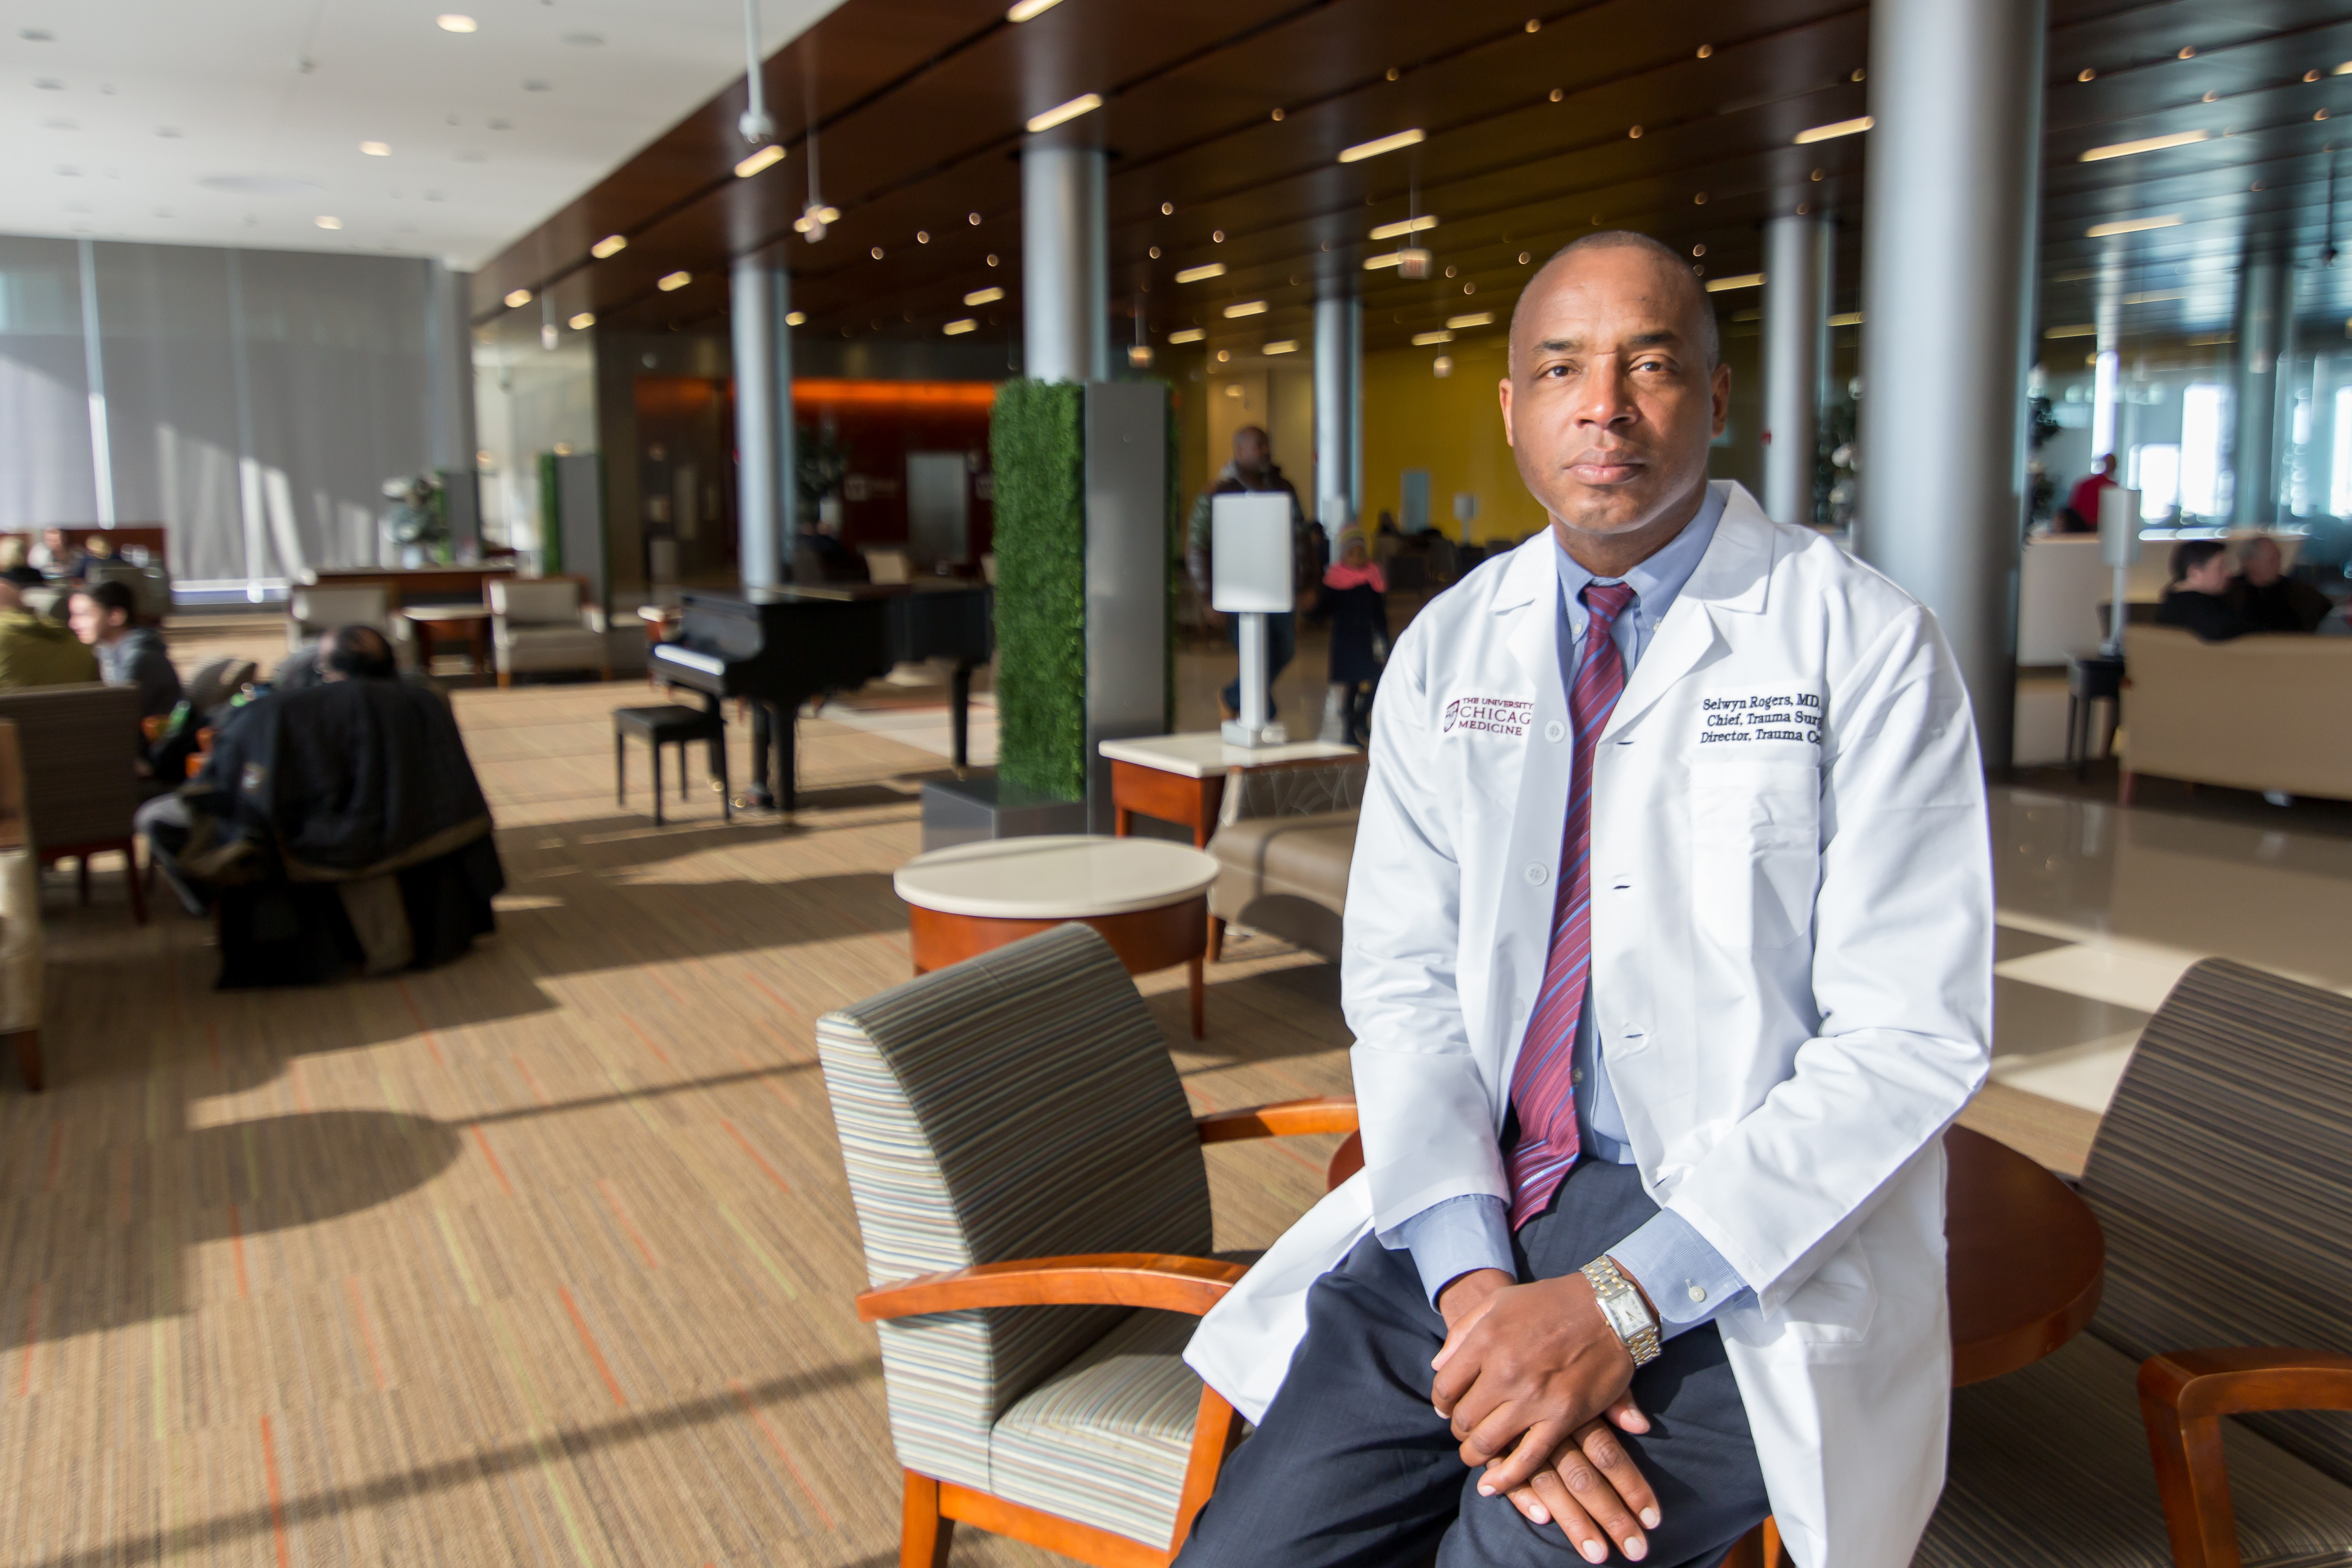 Dr. Selwyn Rogers sits on a chair in a hospital lobby. He wears a white doctor's coat and looks directly at the camera. The room is sunny and spacious.